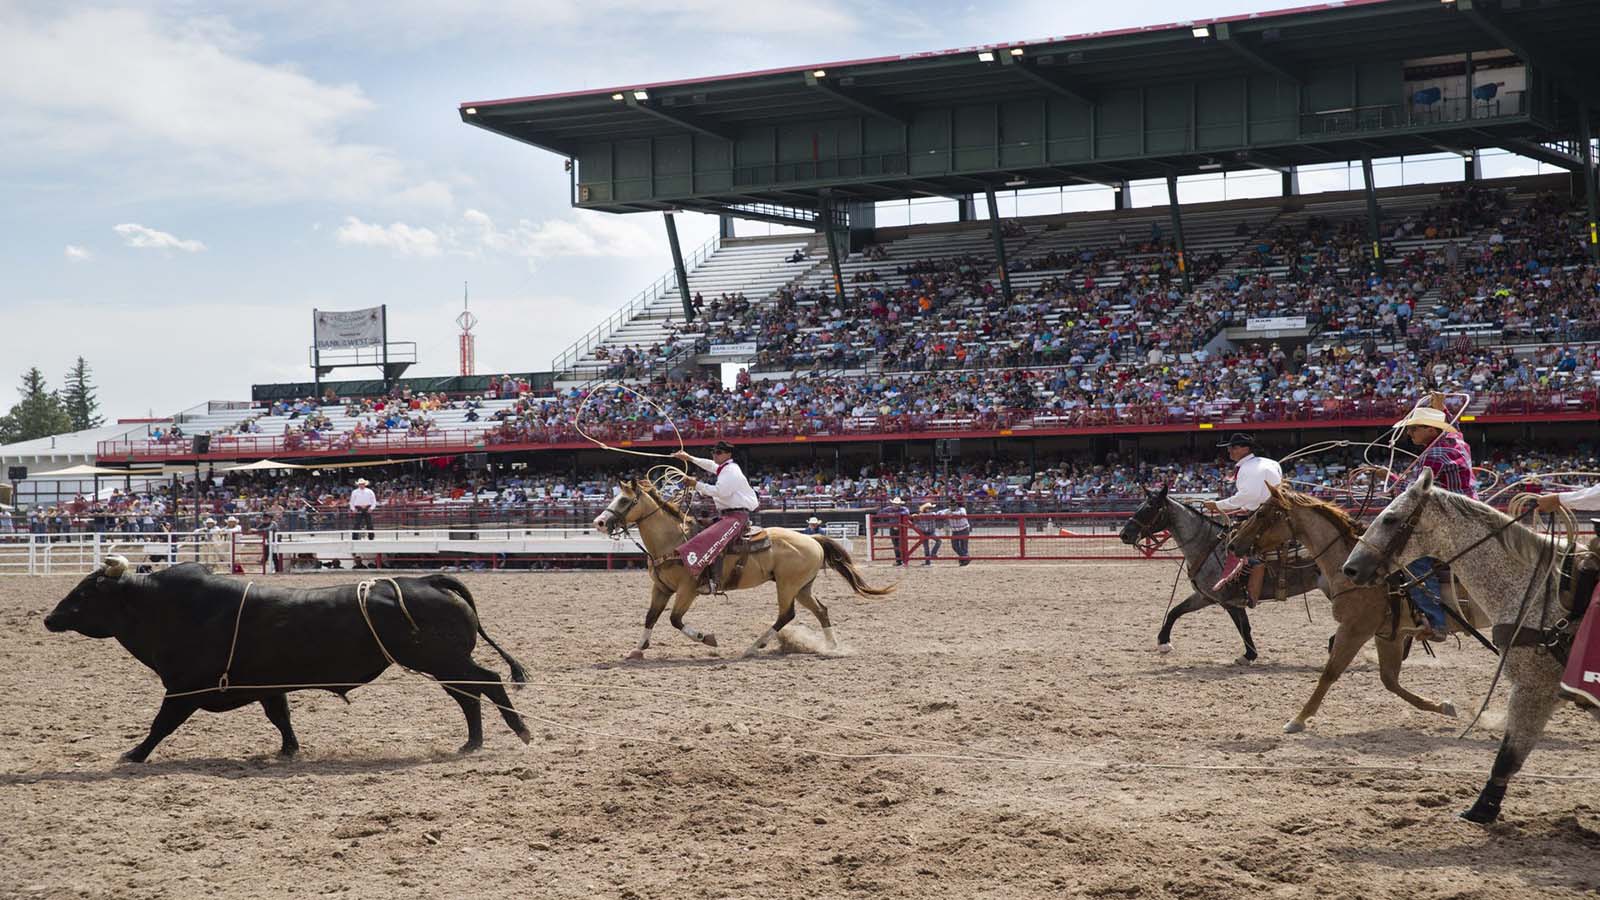 What Are The Popular Rodeo Events In Wyoming?